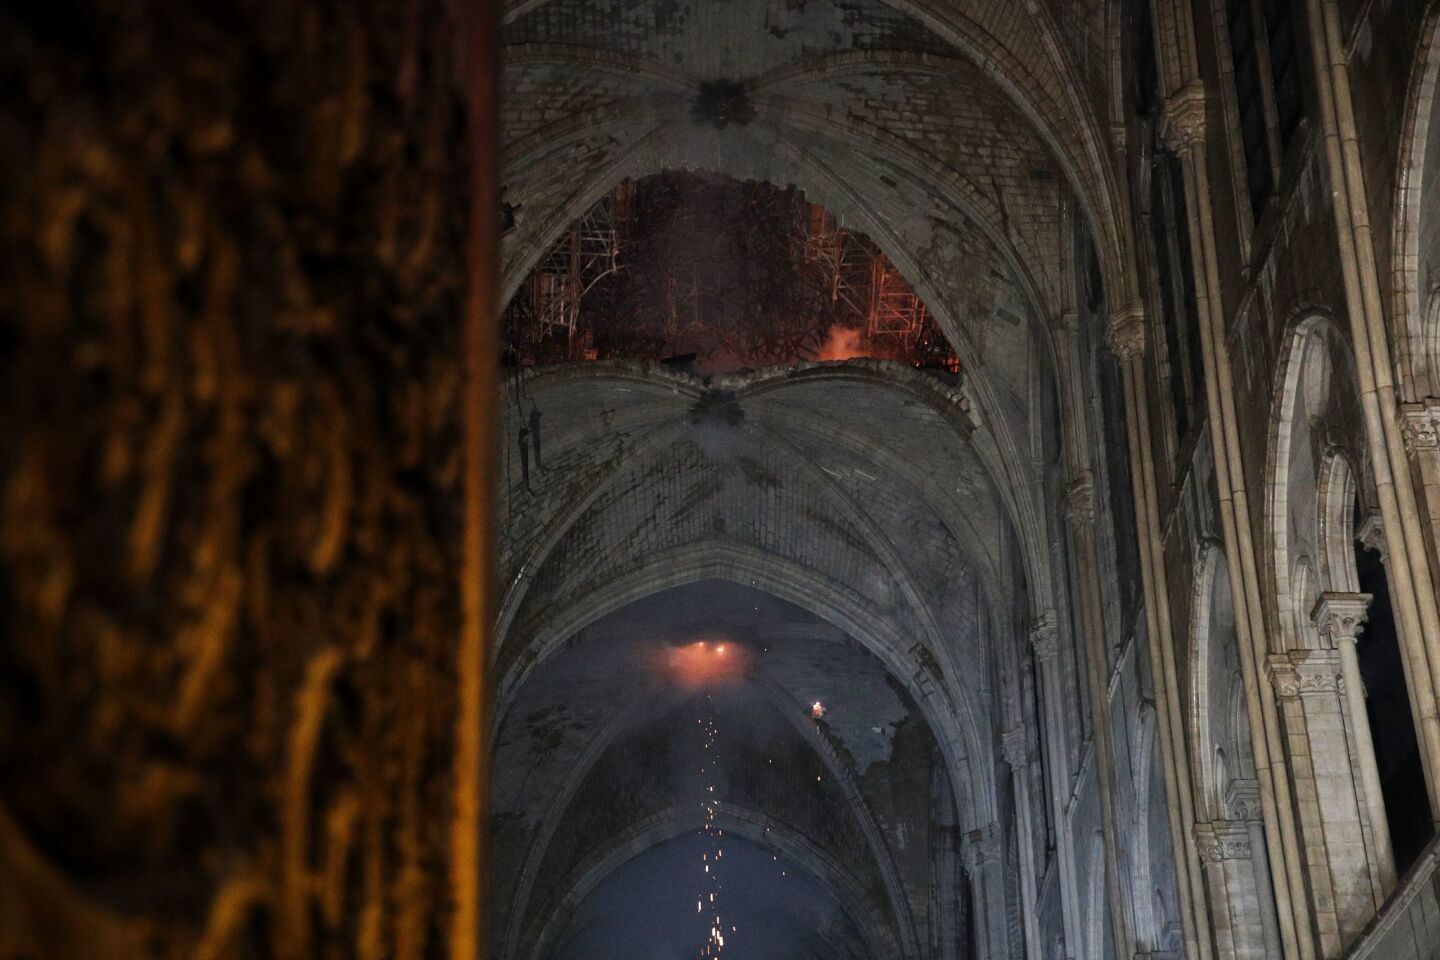 The roof of Notre Dame after the massive fire. A ferocious and fast-moving blaze, which broke out about 6:45 p.m., destroyed large parts of the 850-year-old Gothic monument in Paris.